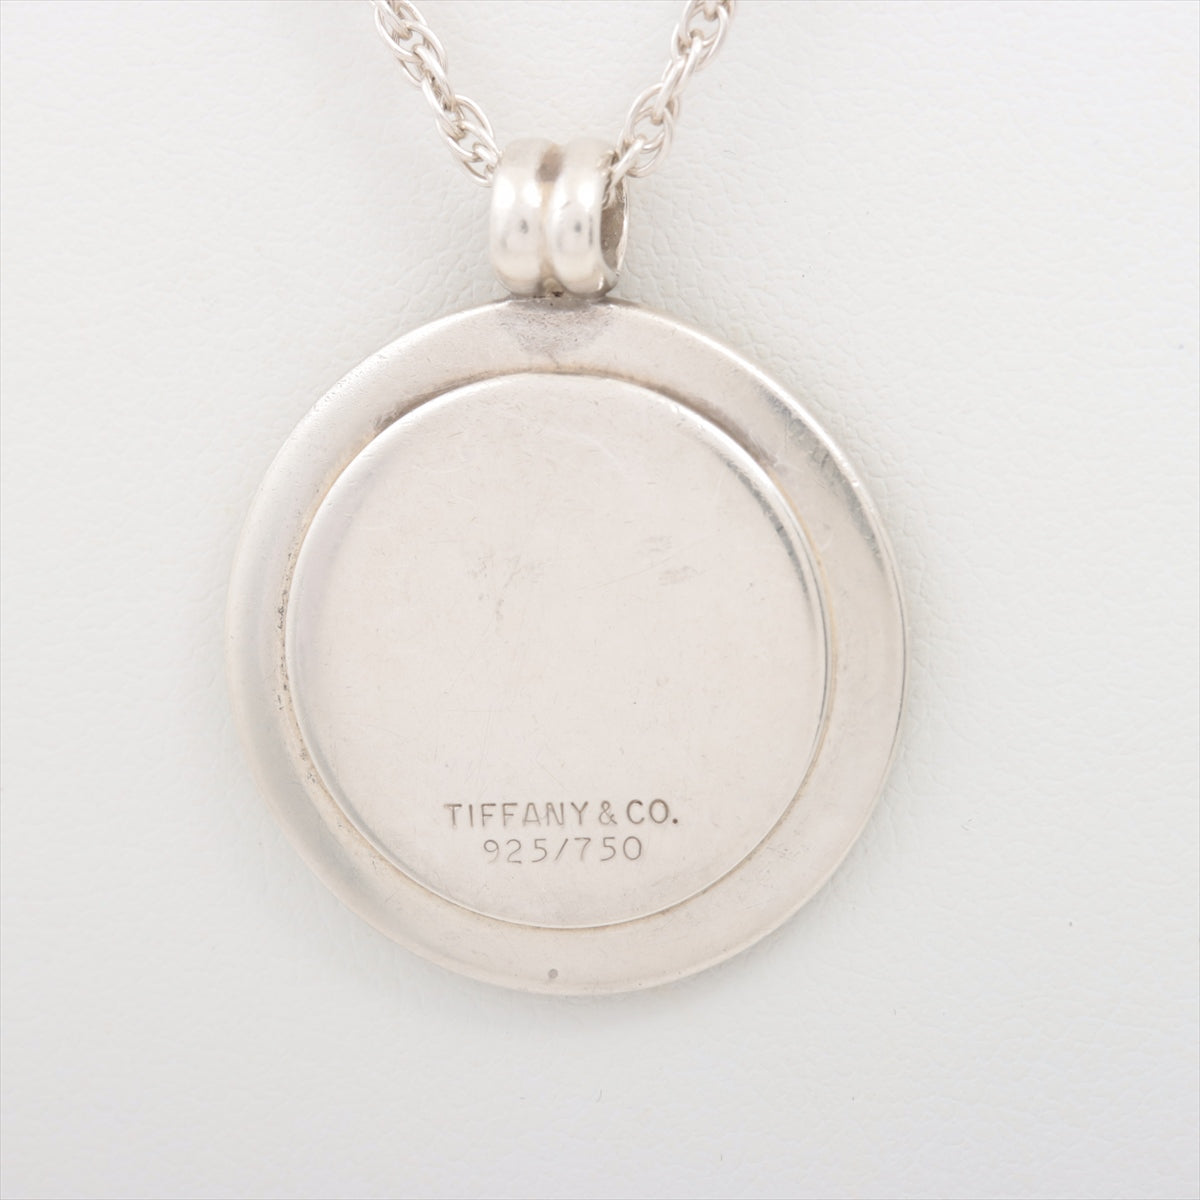 Tiffany Saint Christopher Necklace 925×750 13.7g Silver x gold